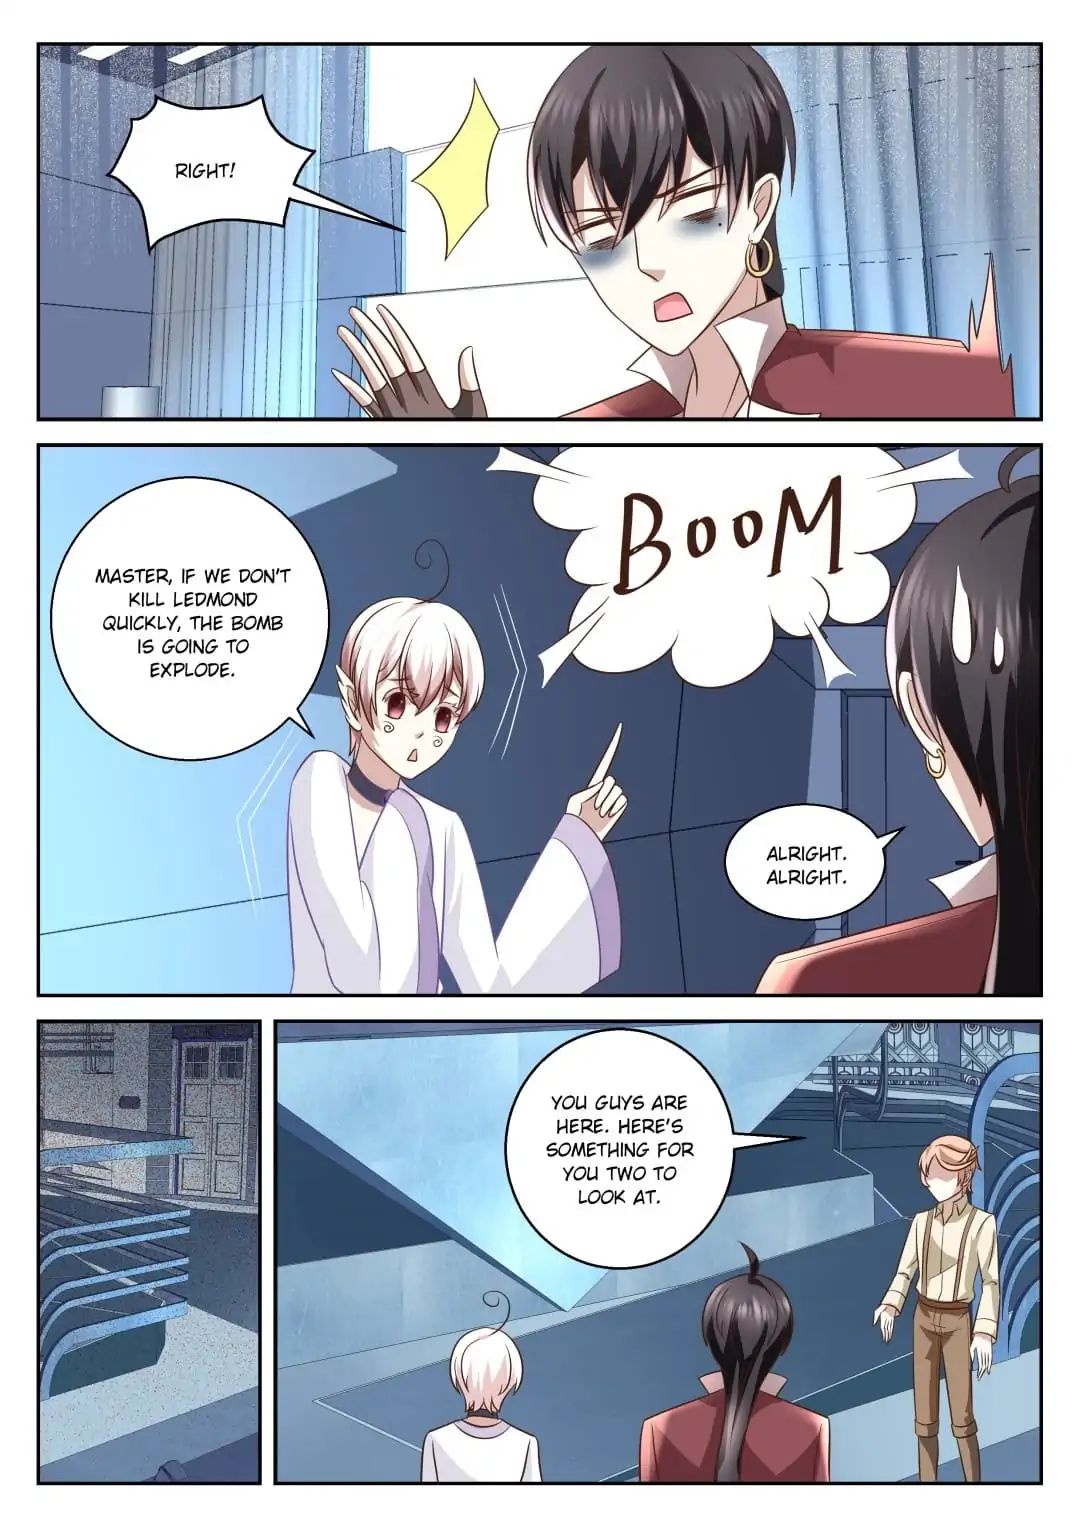 Lost Dragon - chapter 133 - #4